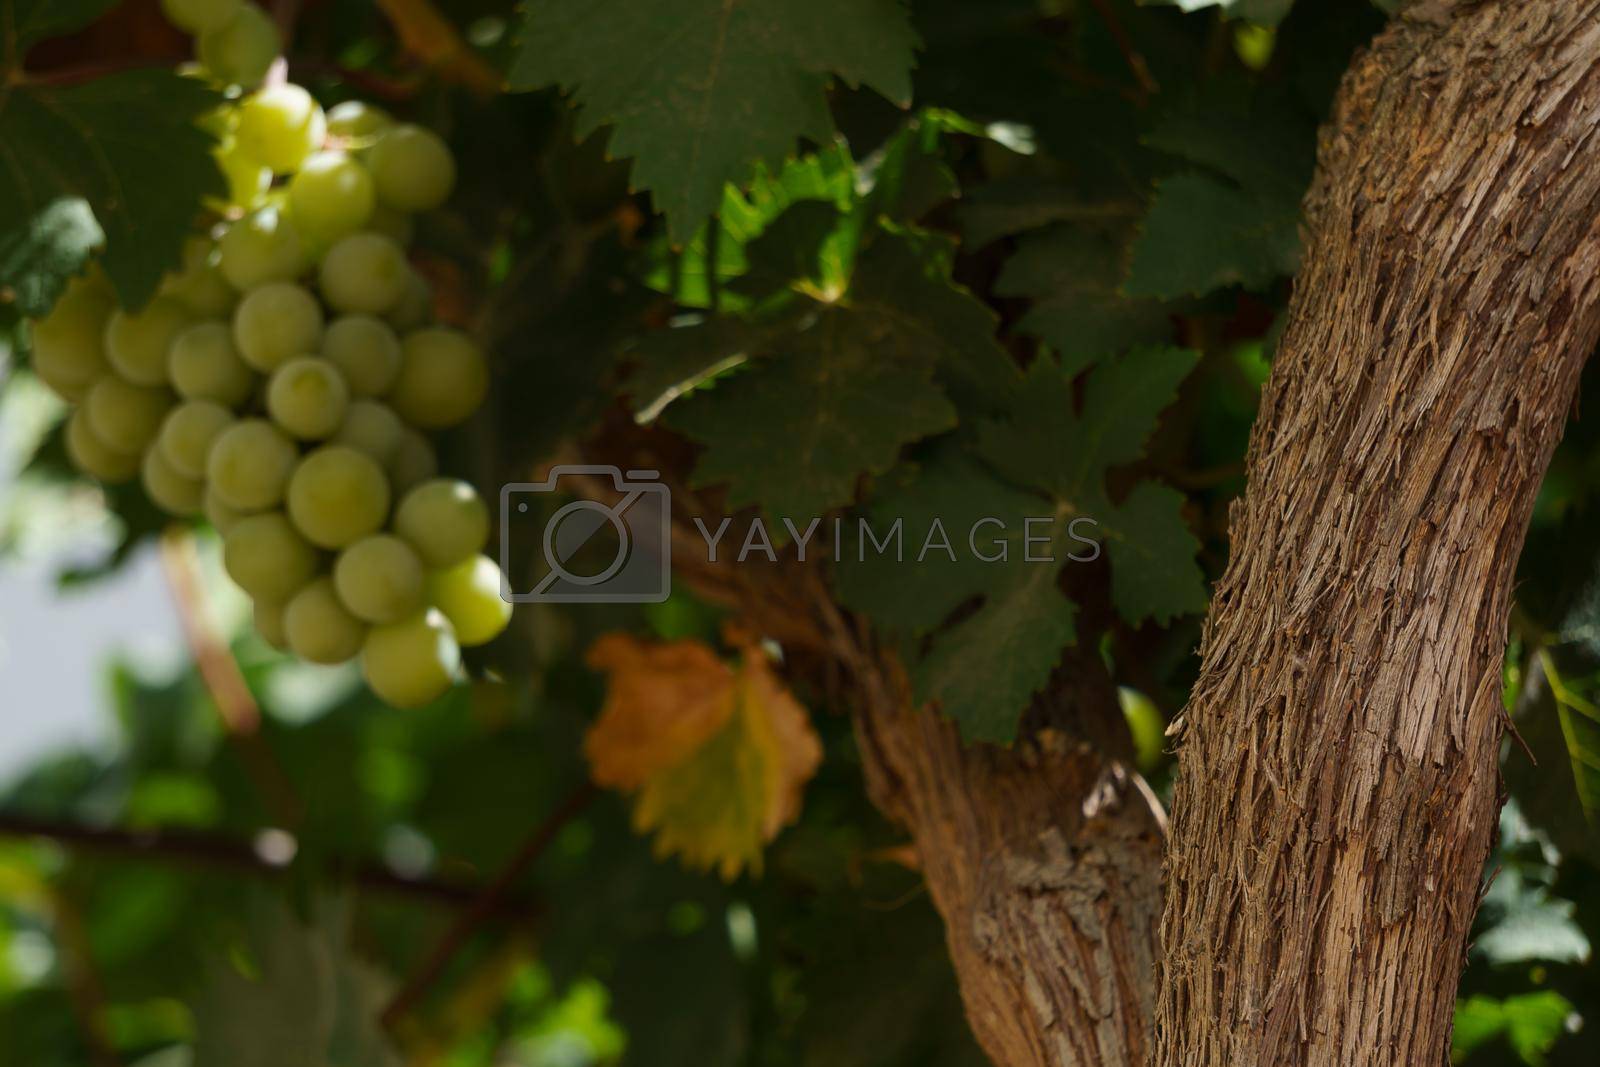 Royalty free image of bunch of green grapes on the vine illuminated by the sun's rays by joseantona